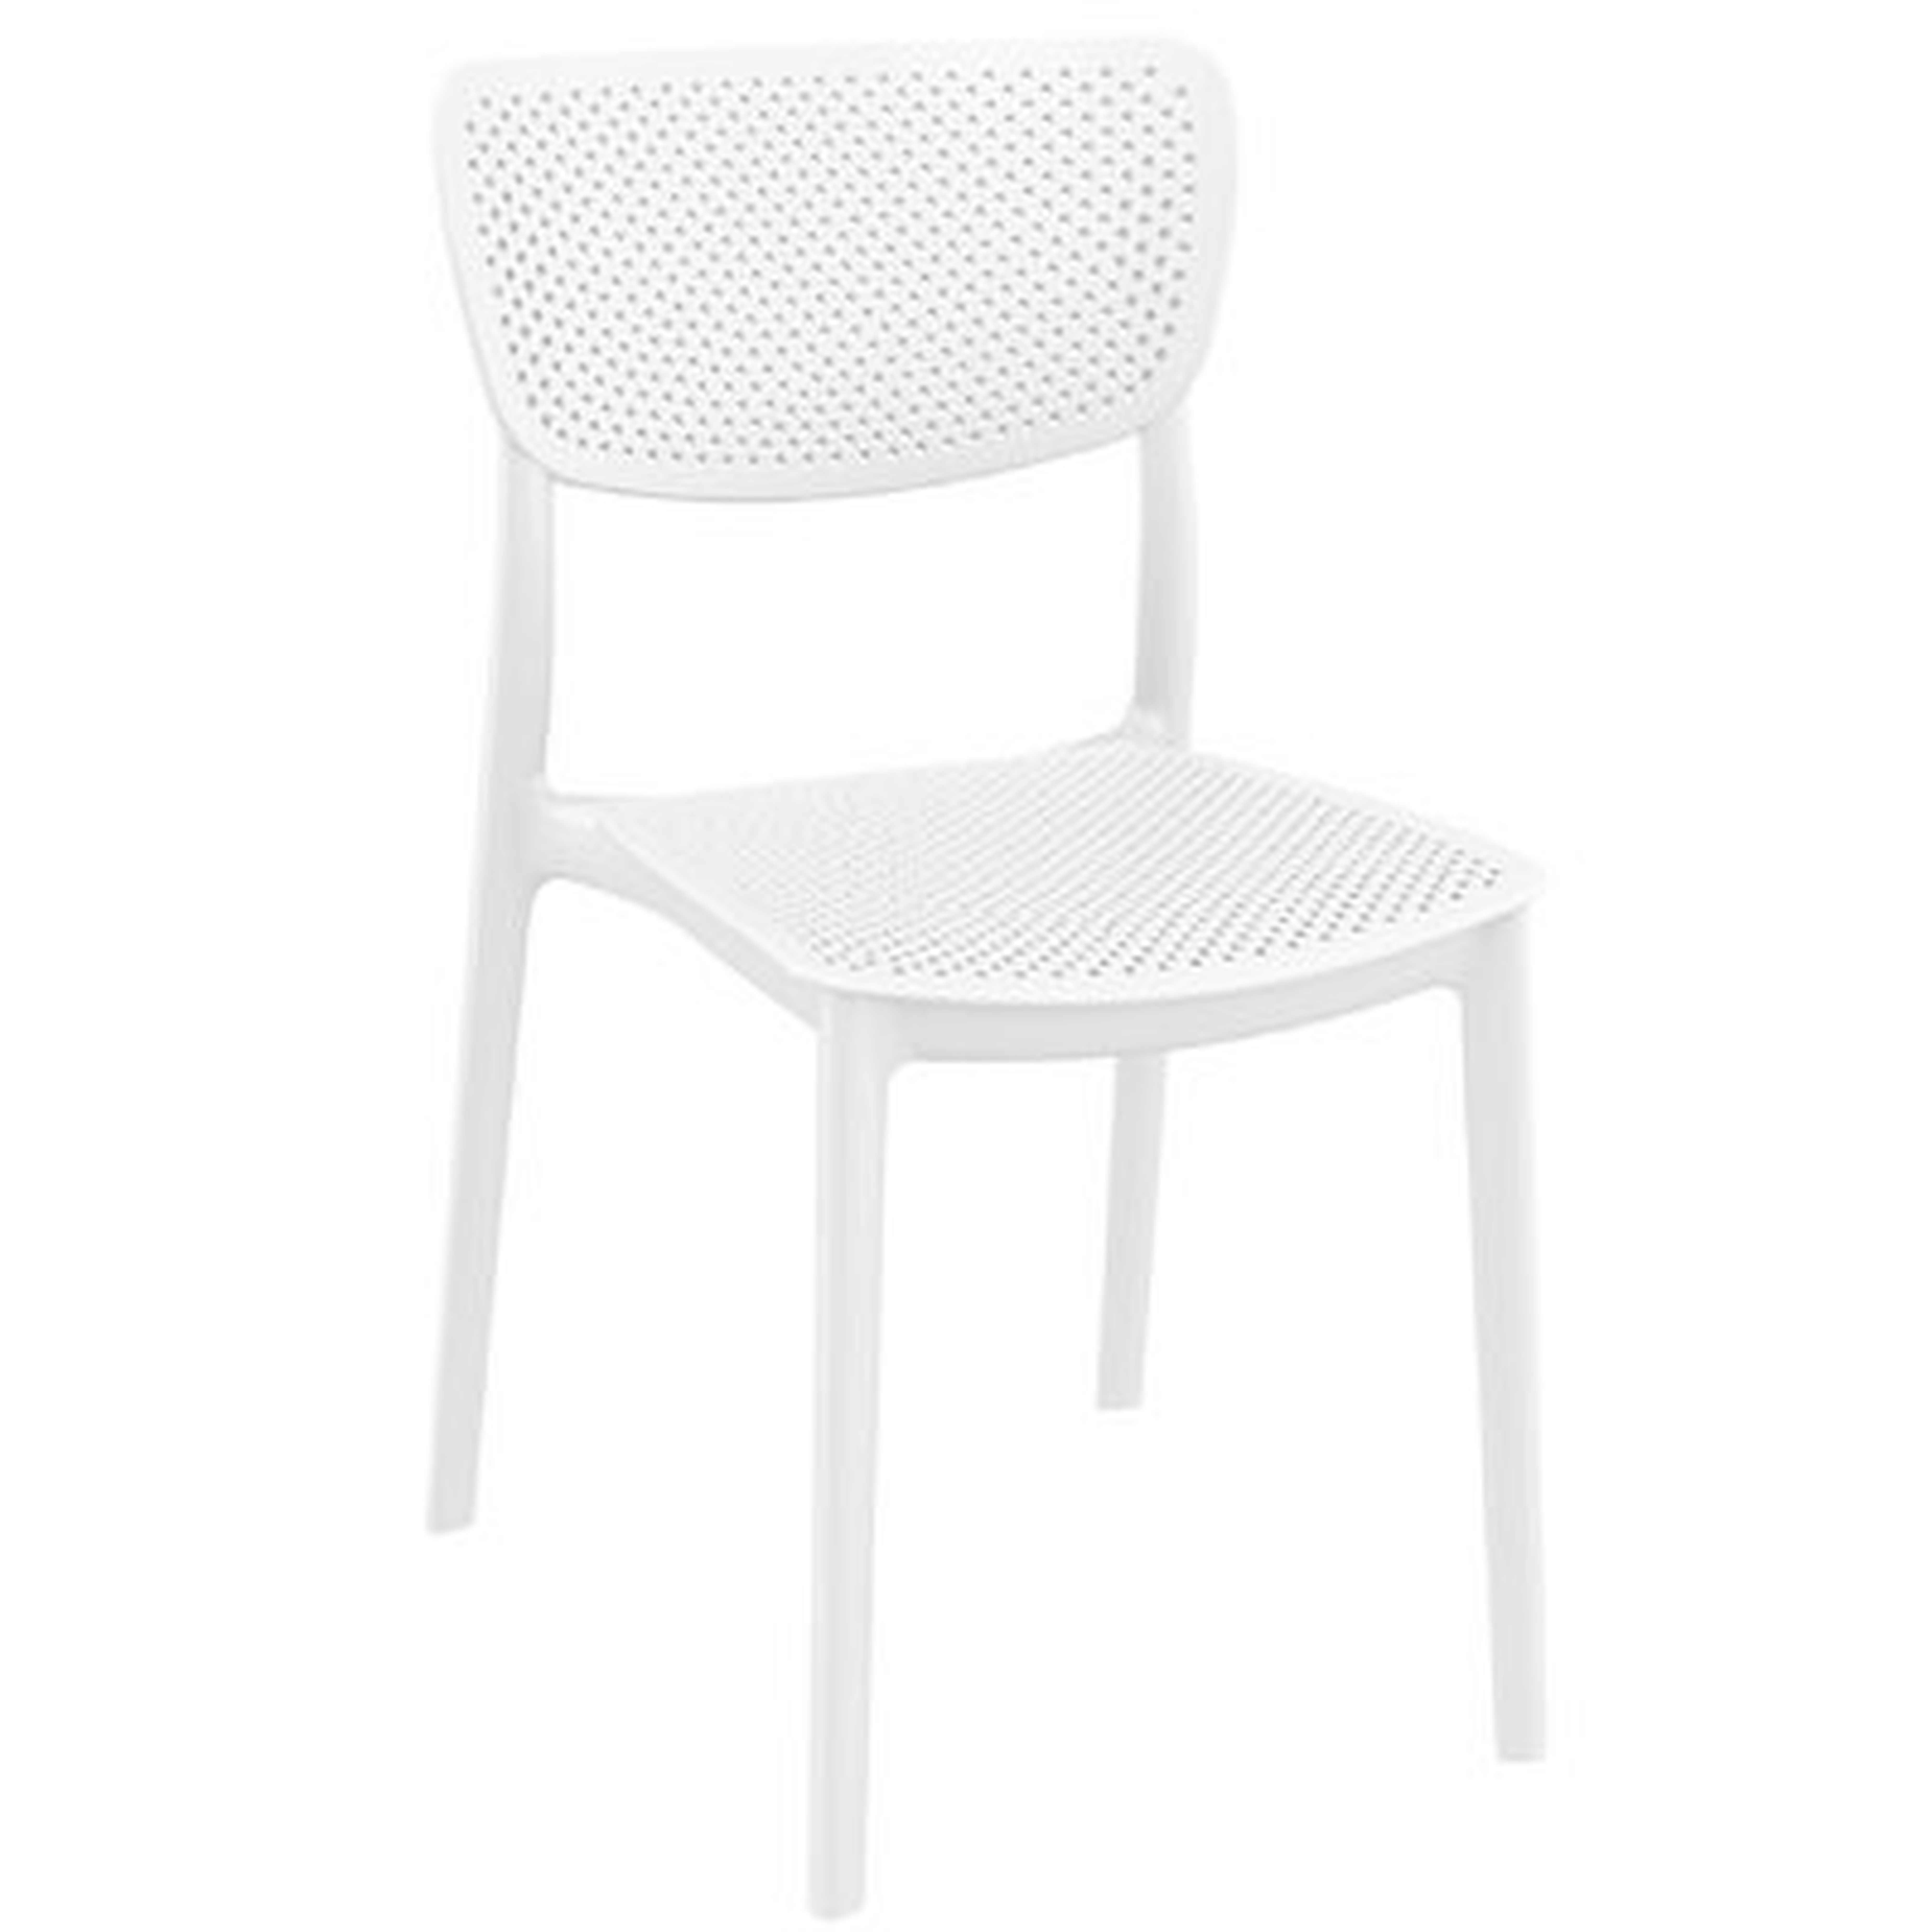 Curnutt Stacking Patio Dining Chair (Set of 2) - AllModern